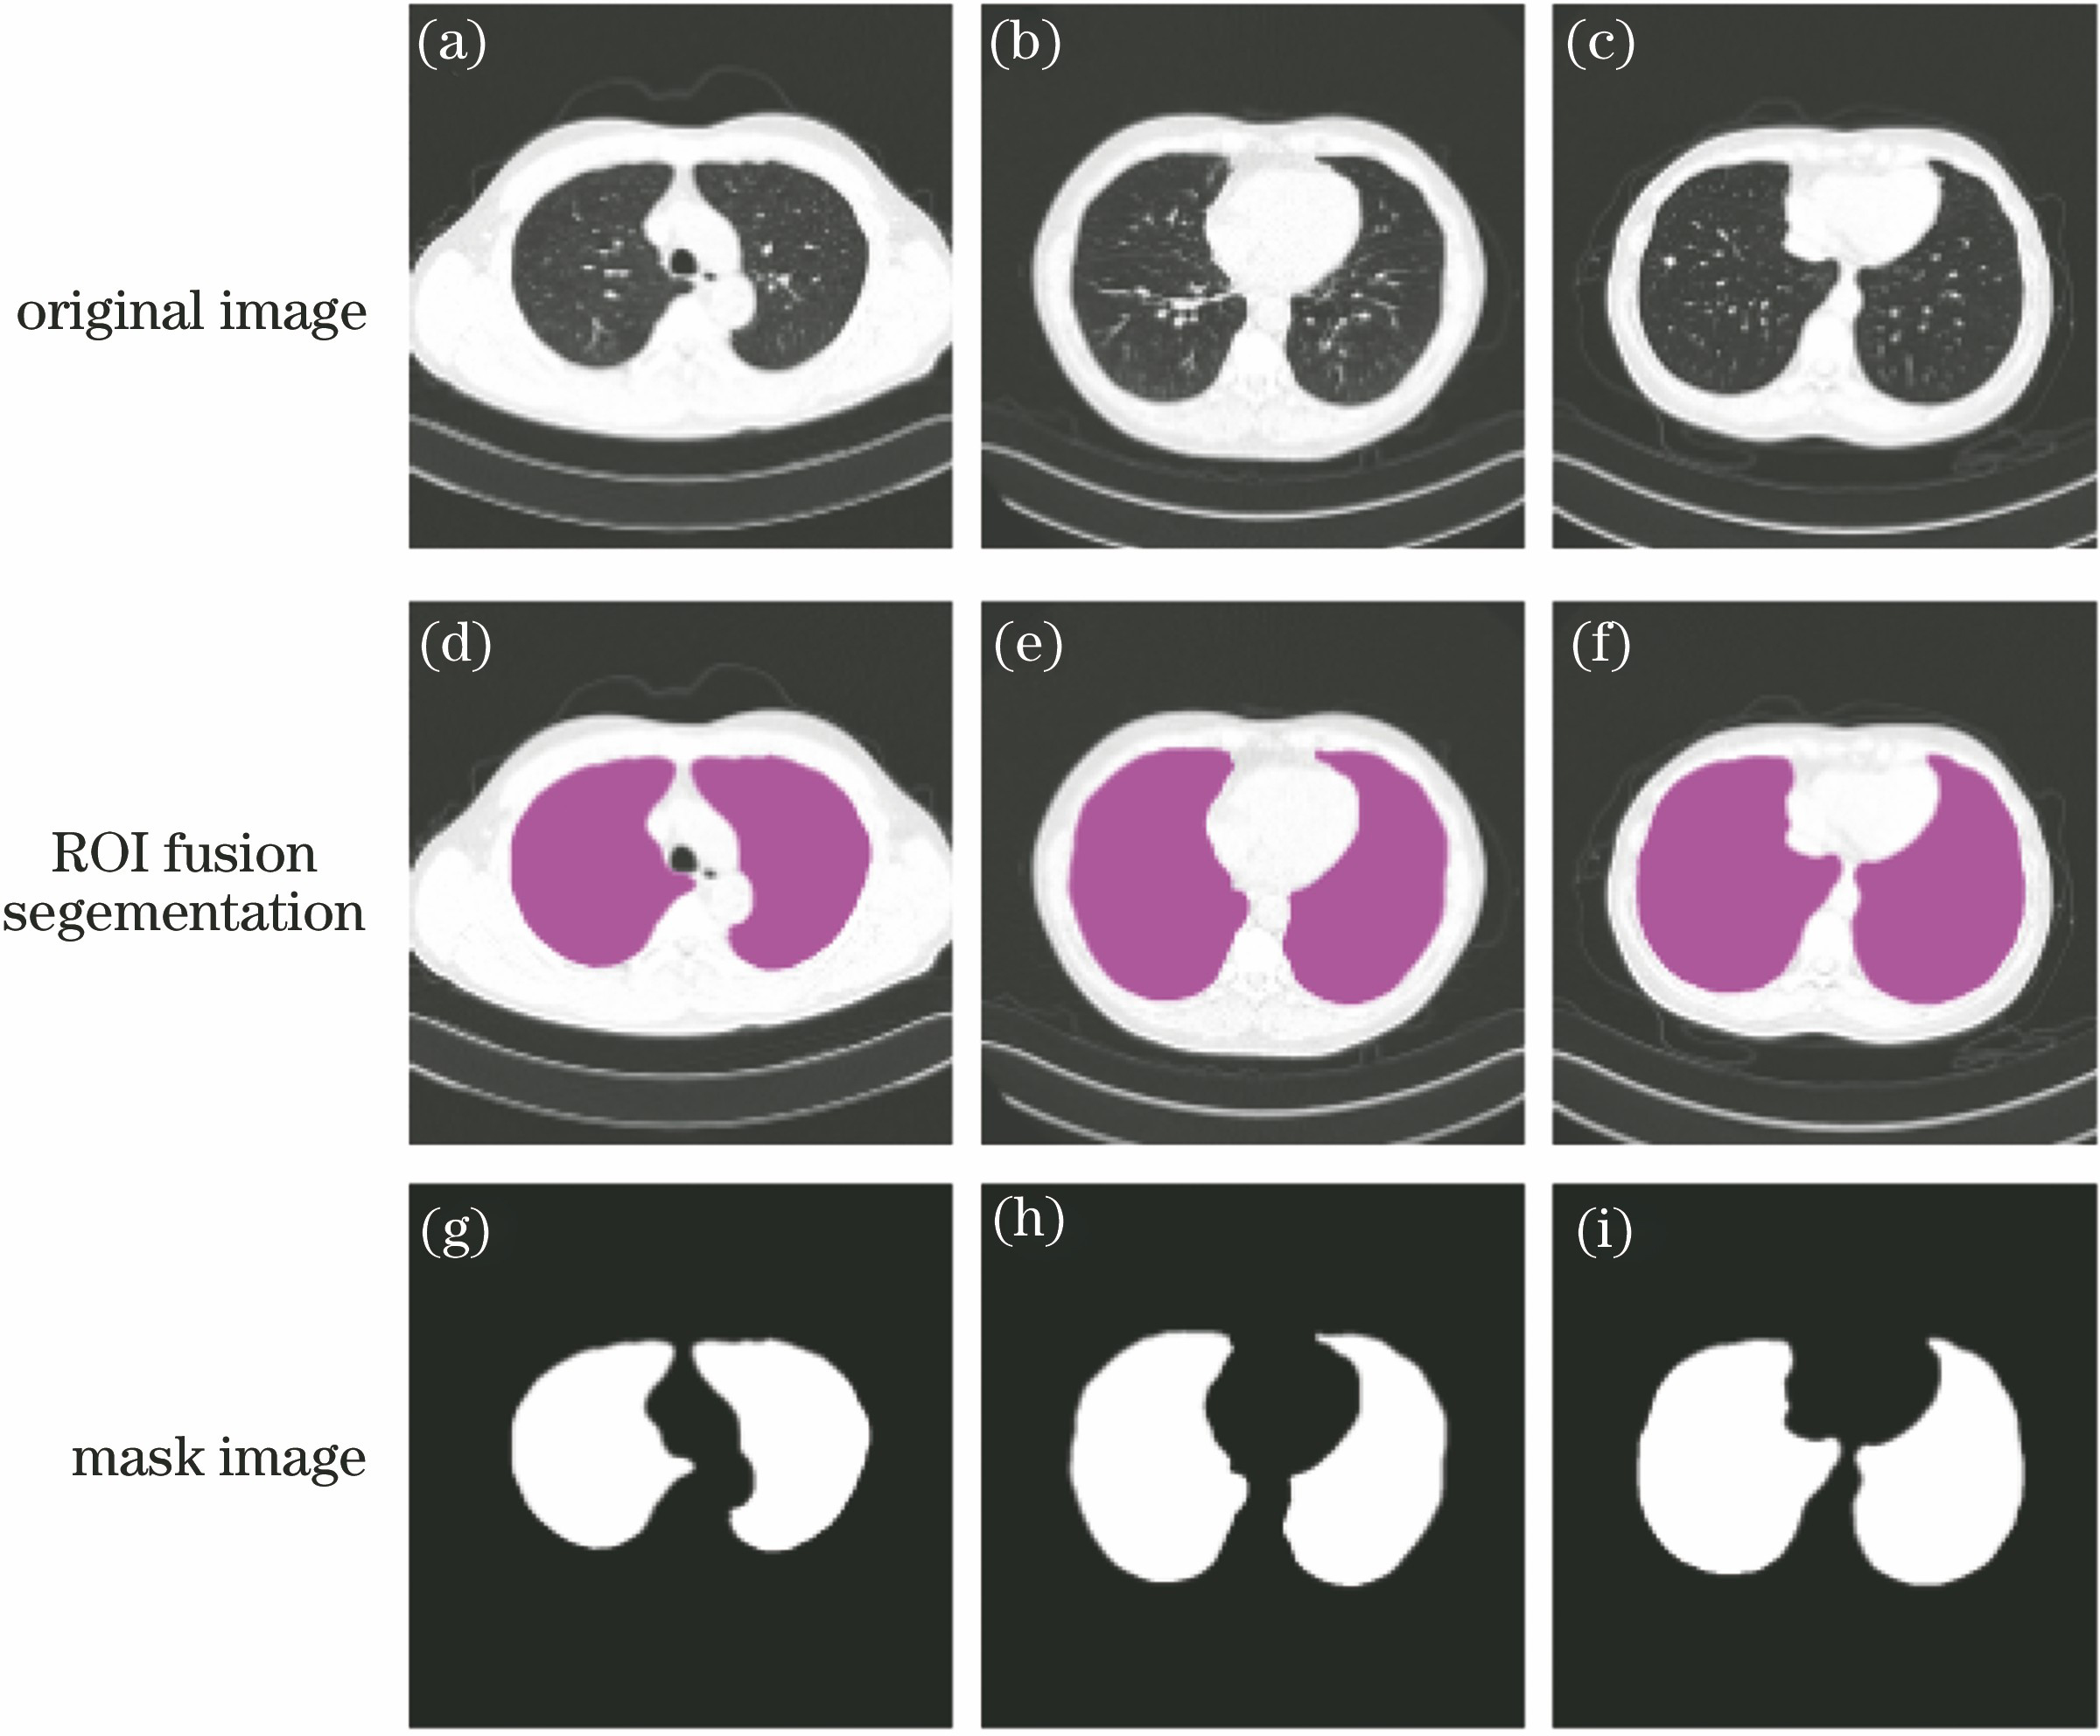 Regional fusion segmentation of lung tissues. (a)-(c) Images to be fused; (d)-(f) fusion and segmentation images; (g)-(j) binary images of mask